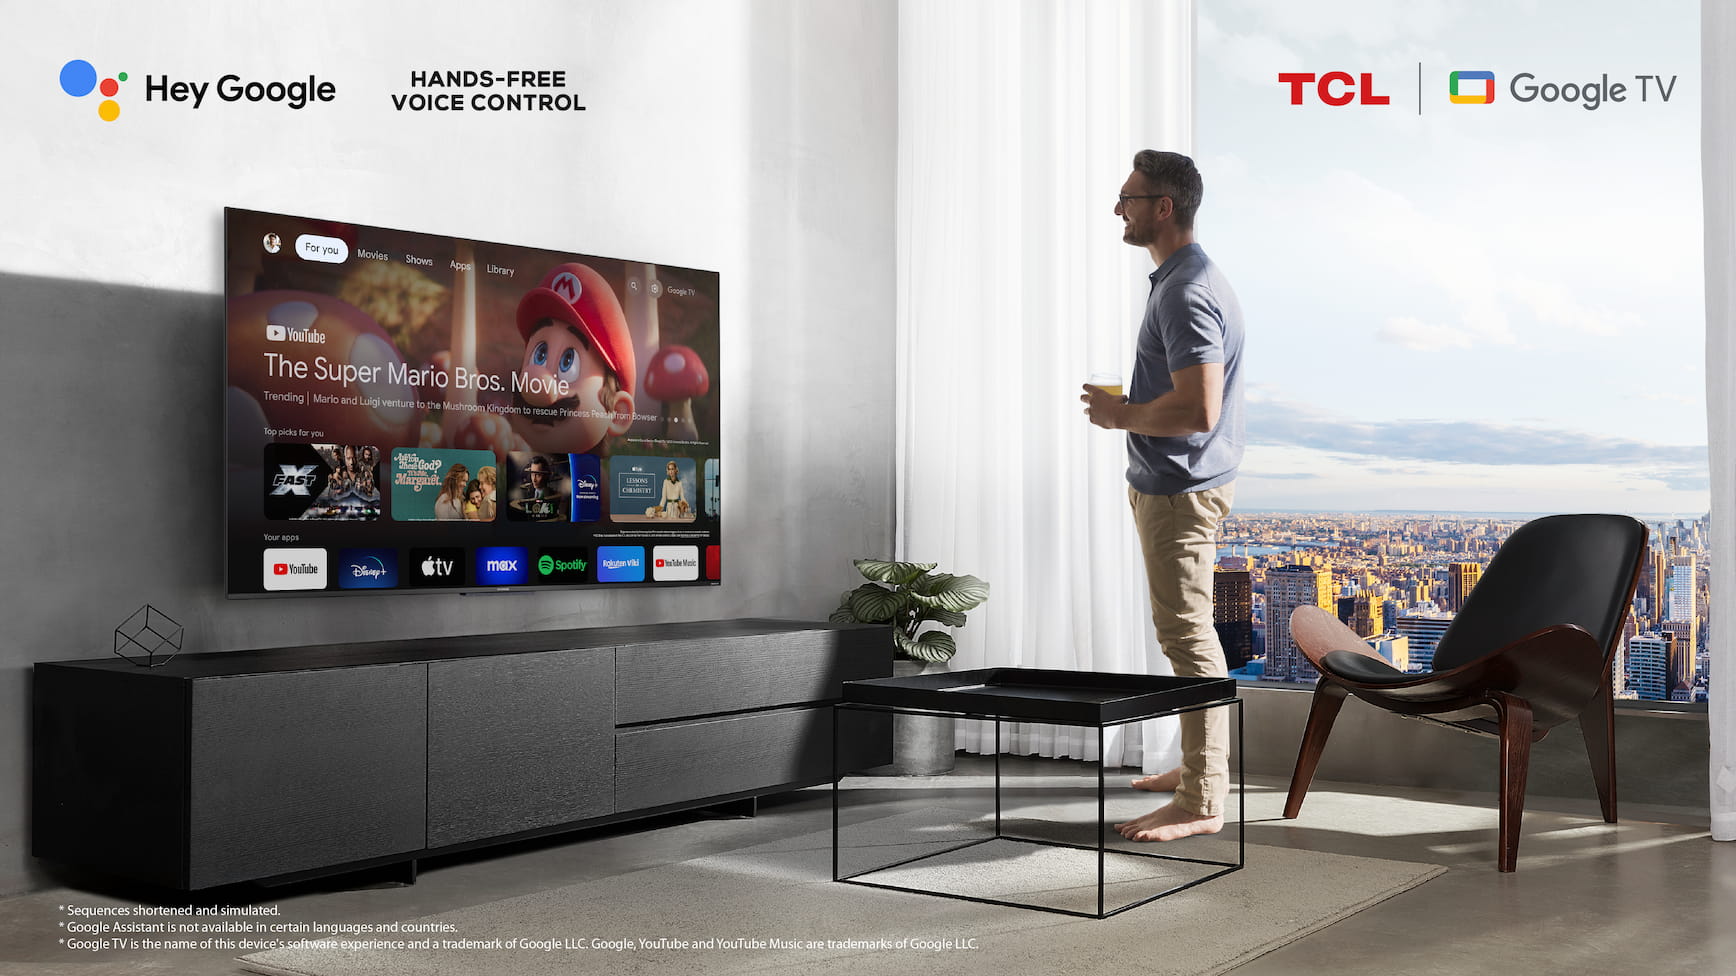 TCL 115" X955 can use in Hands-free Google Assistant